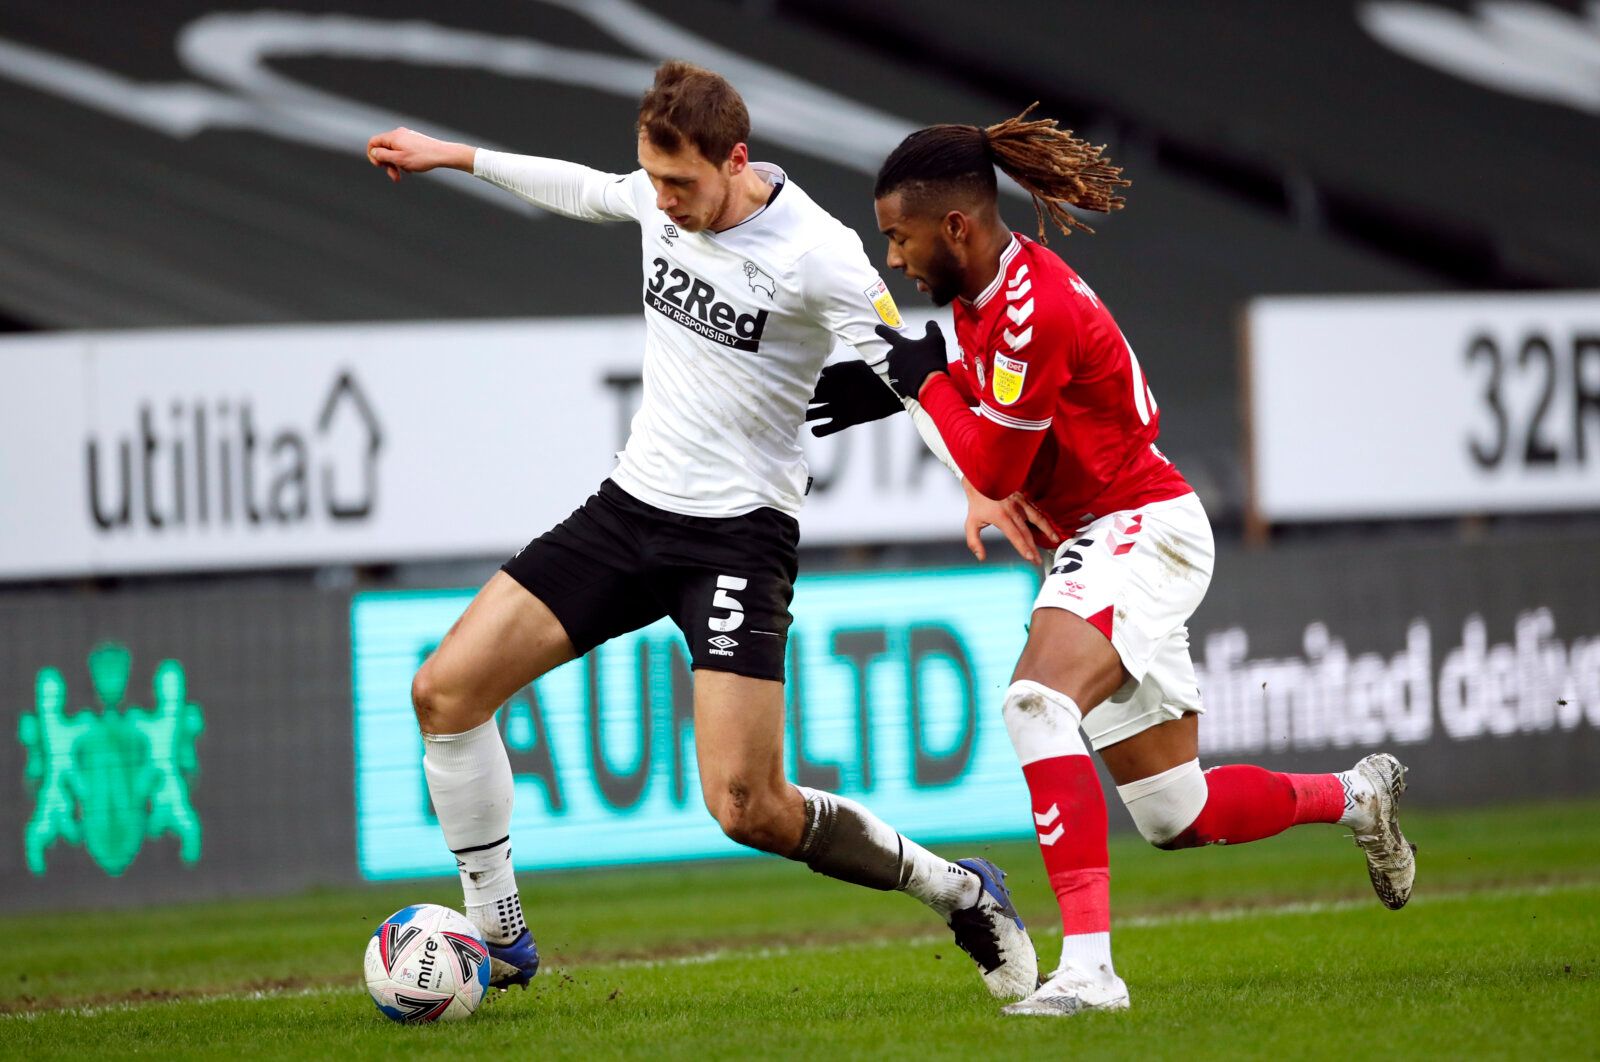 Soccer Football - Championship - Derby County v Bristol City - Pride Park, Derby, Britain - January 30, 2021 Derby County's Krystian Bielik in action with Bristol City's Kasey Palmer Action Images/Andrew Boyers EDITORIAL USE ONLY. No use with unauthorized audio, video, data, fixture lists, club/league logos or 'live' services. Online in-match use limited to 75 images, no video emulation. No use in betting, games or single club /league/player publications.  Please contact your account representat